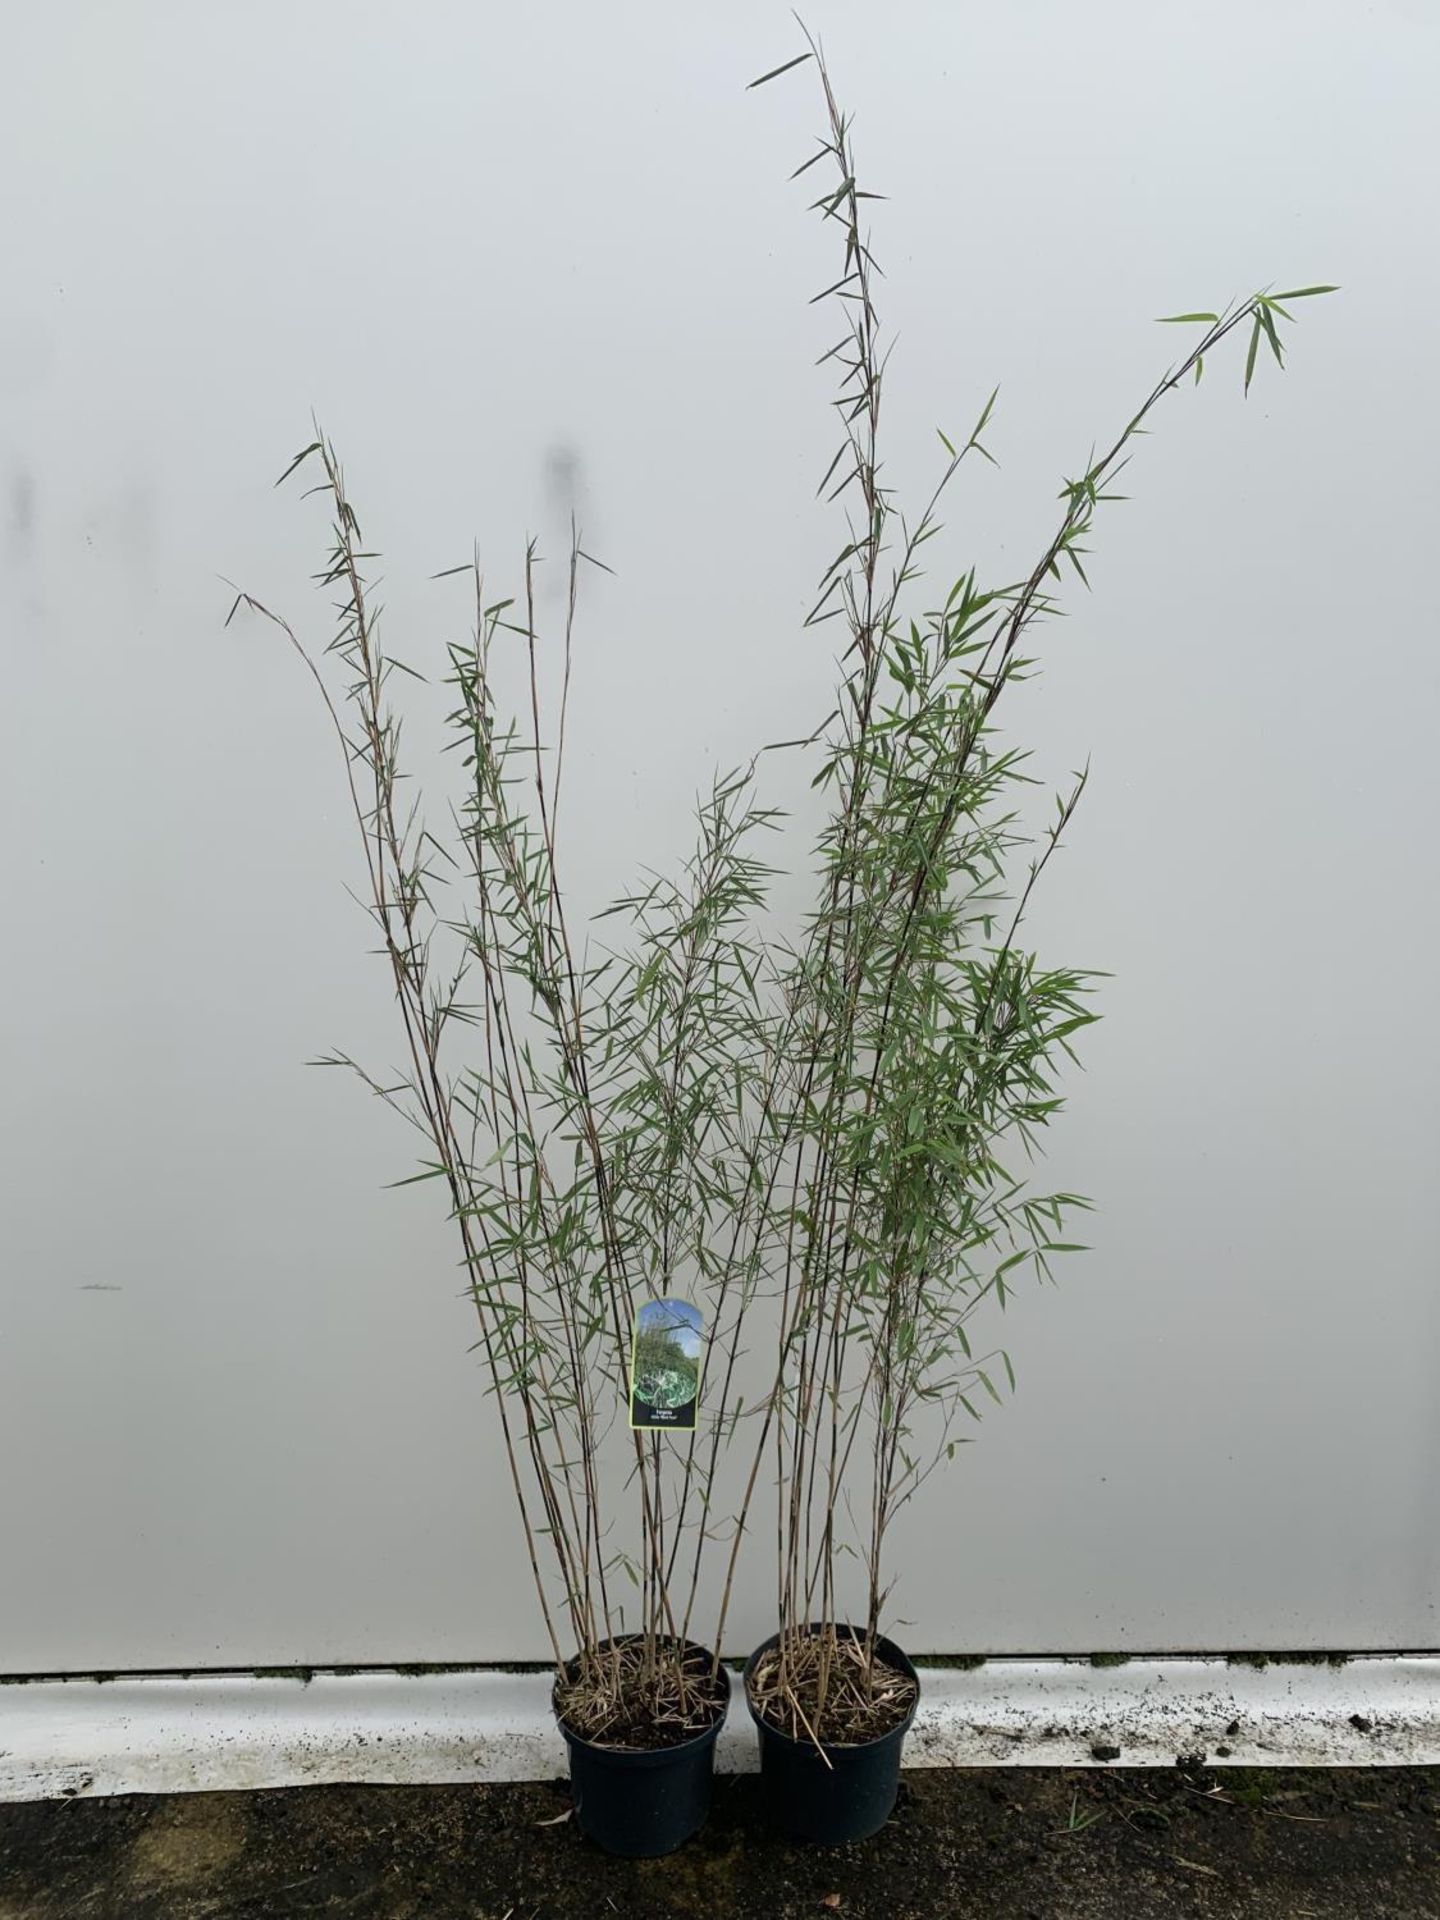 TWO BAMBOO FARGESIA NITIDA 'BLACK PEARL' APPROX 190CM IN HEIGHT IN 5 LTR POTS PLUS VAT TO BE SOLD - Image 8 of 10